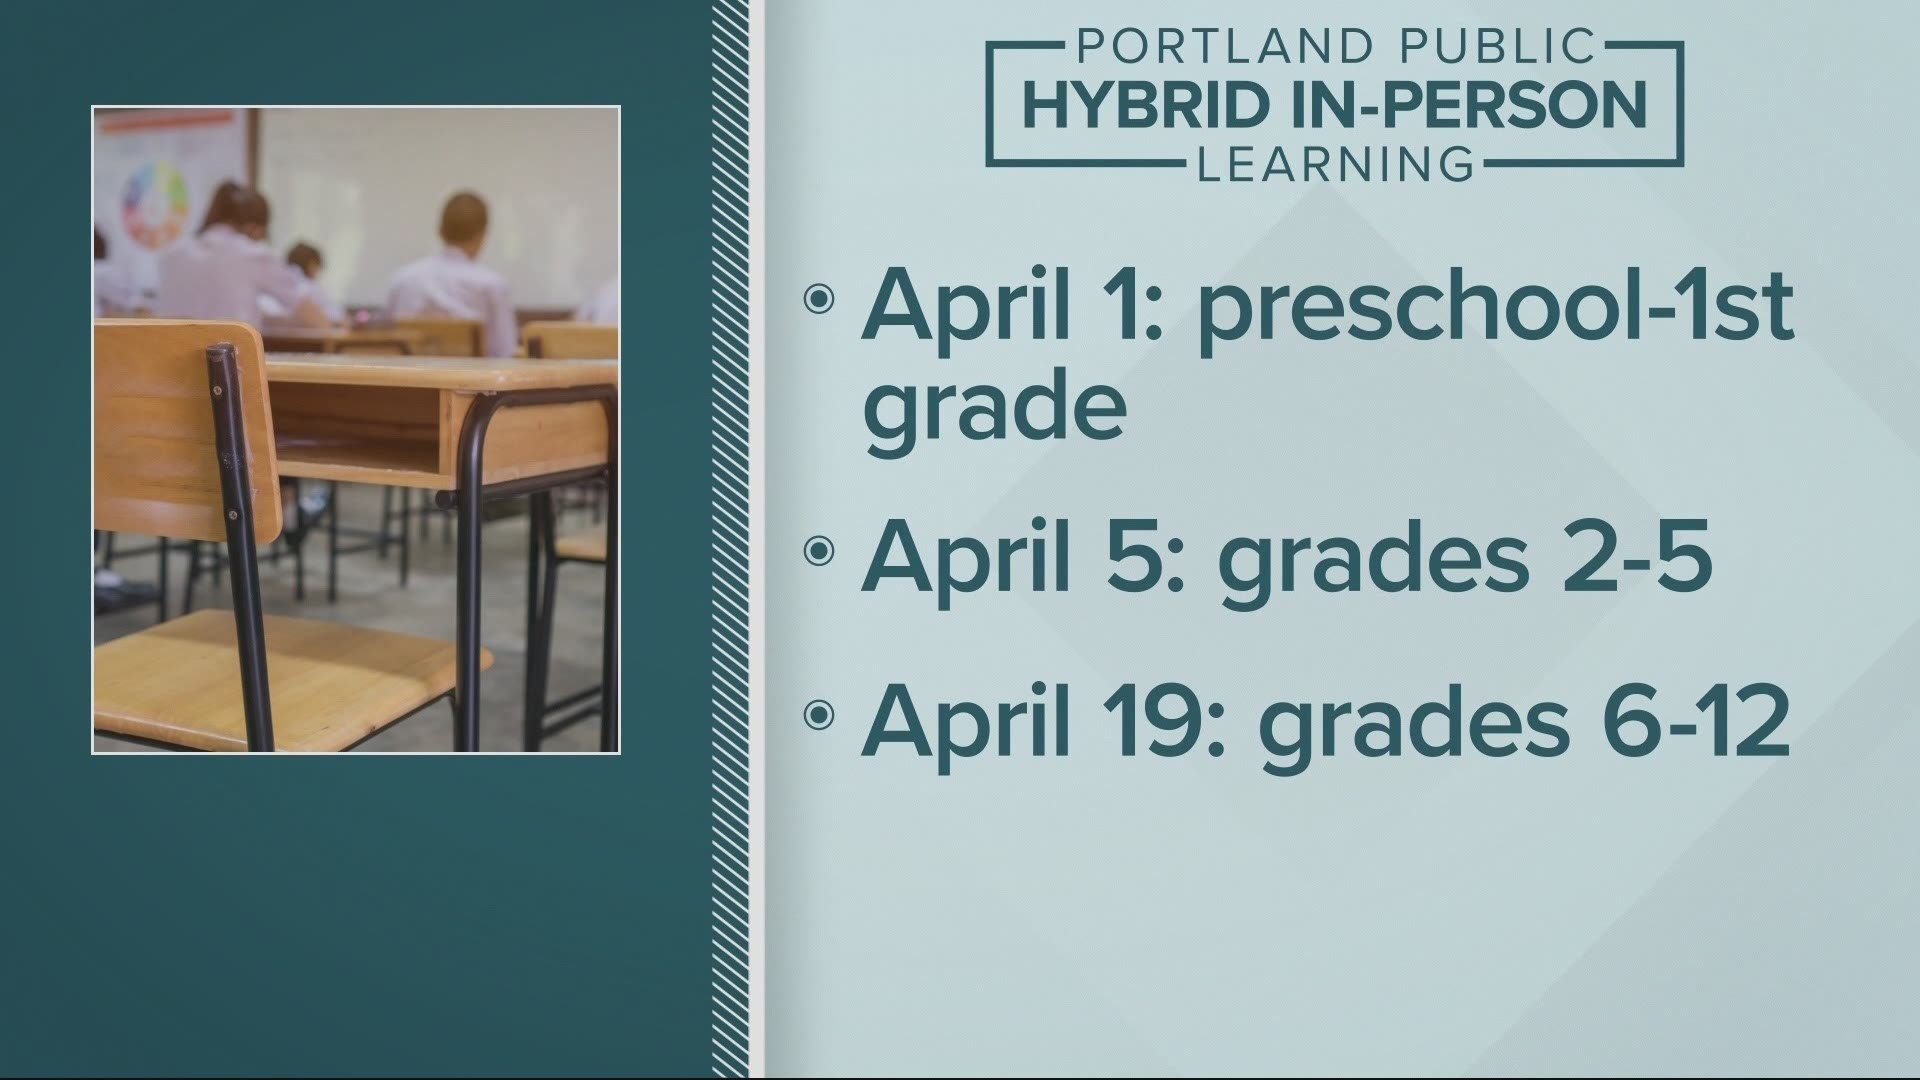 It was the first day of hybrid learning for many young students in Portland Public Schools. Christine Pitawanich got a glimpse of how it went.